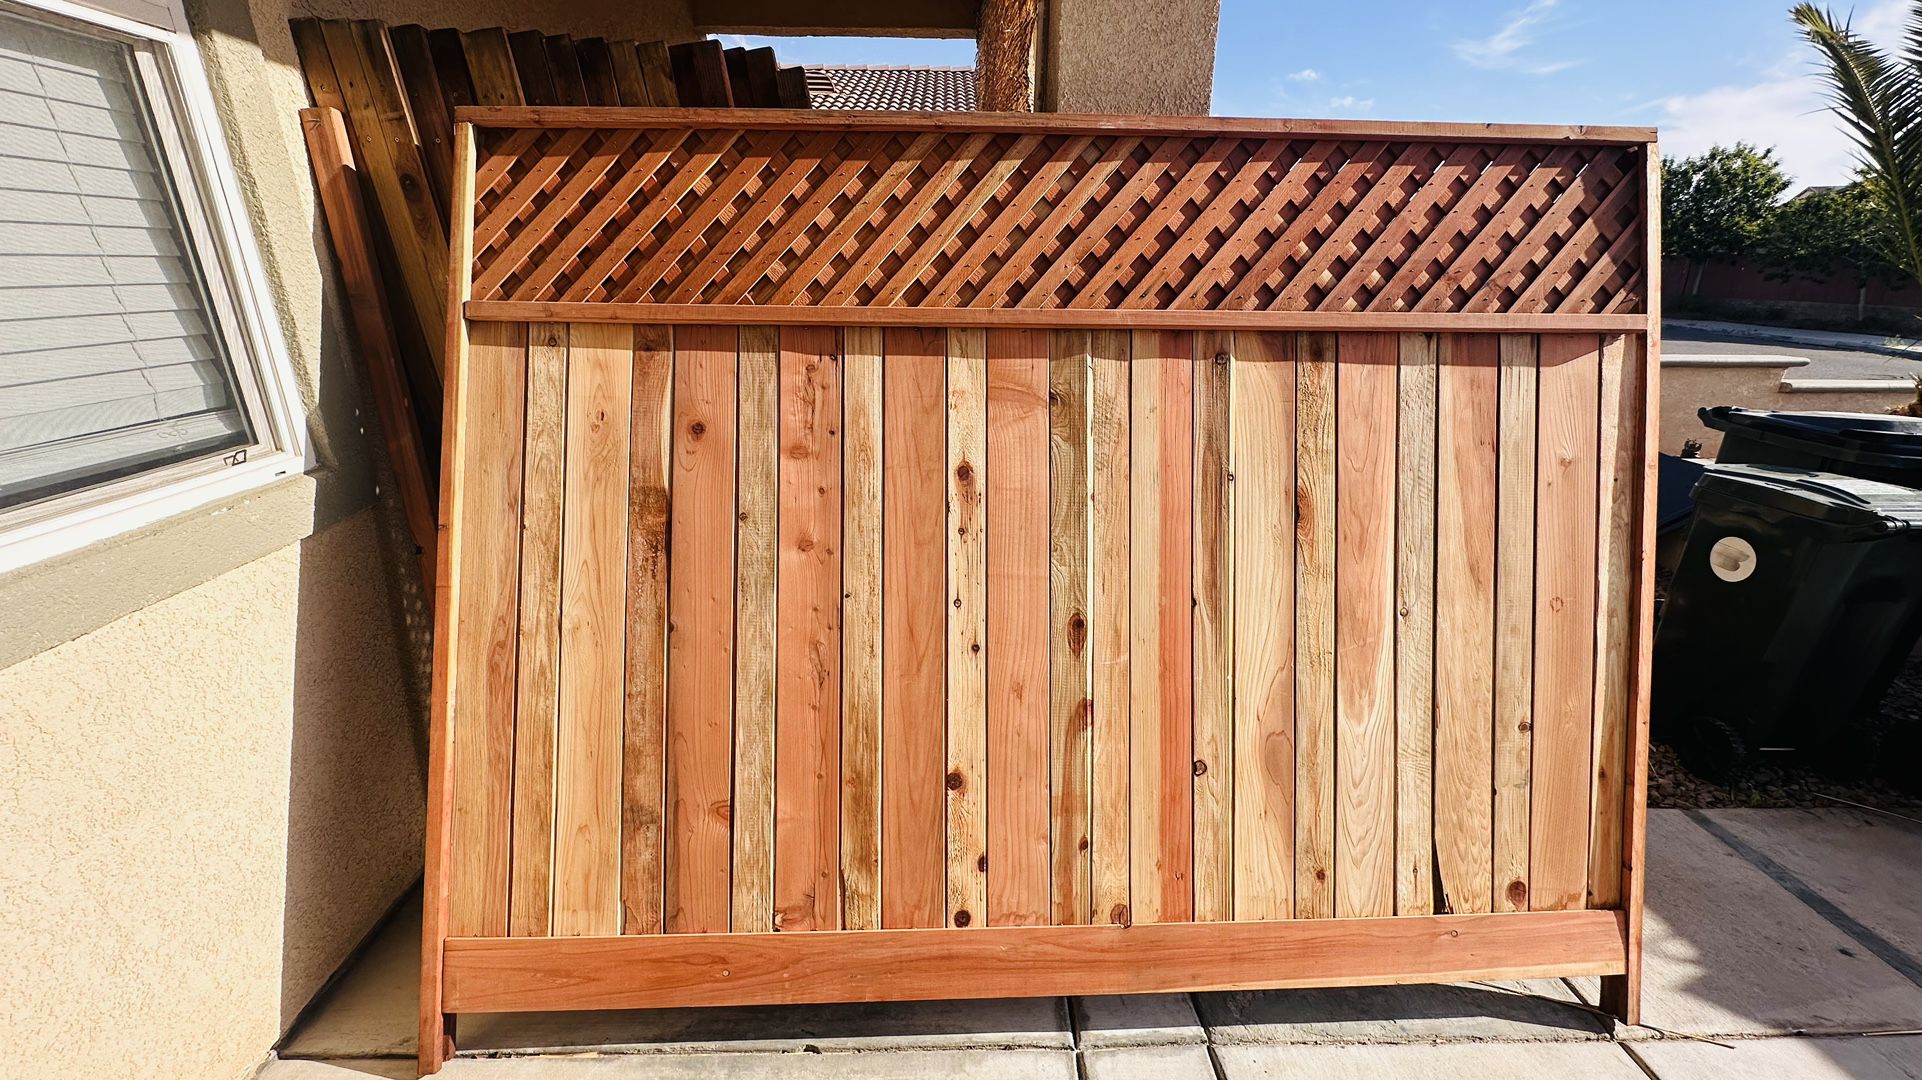 Lattice Wood Fence Panels 6ft X 8ft $115 Each Or $1750 For All 18 Panels